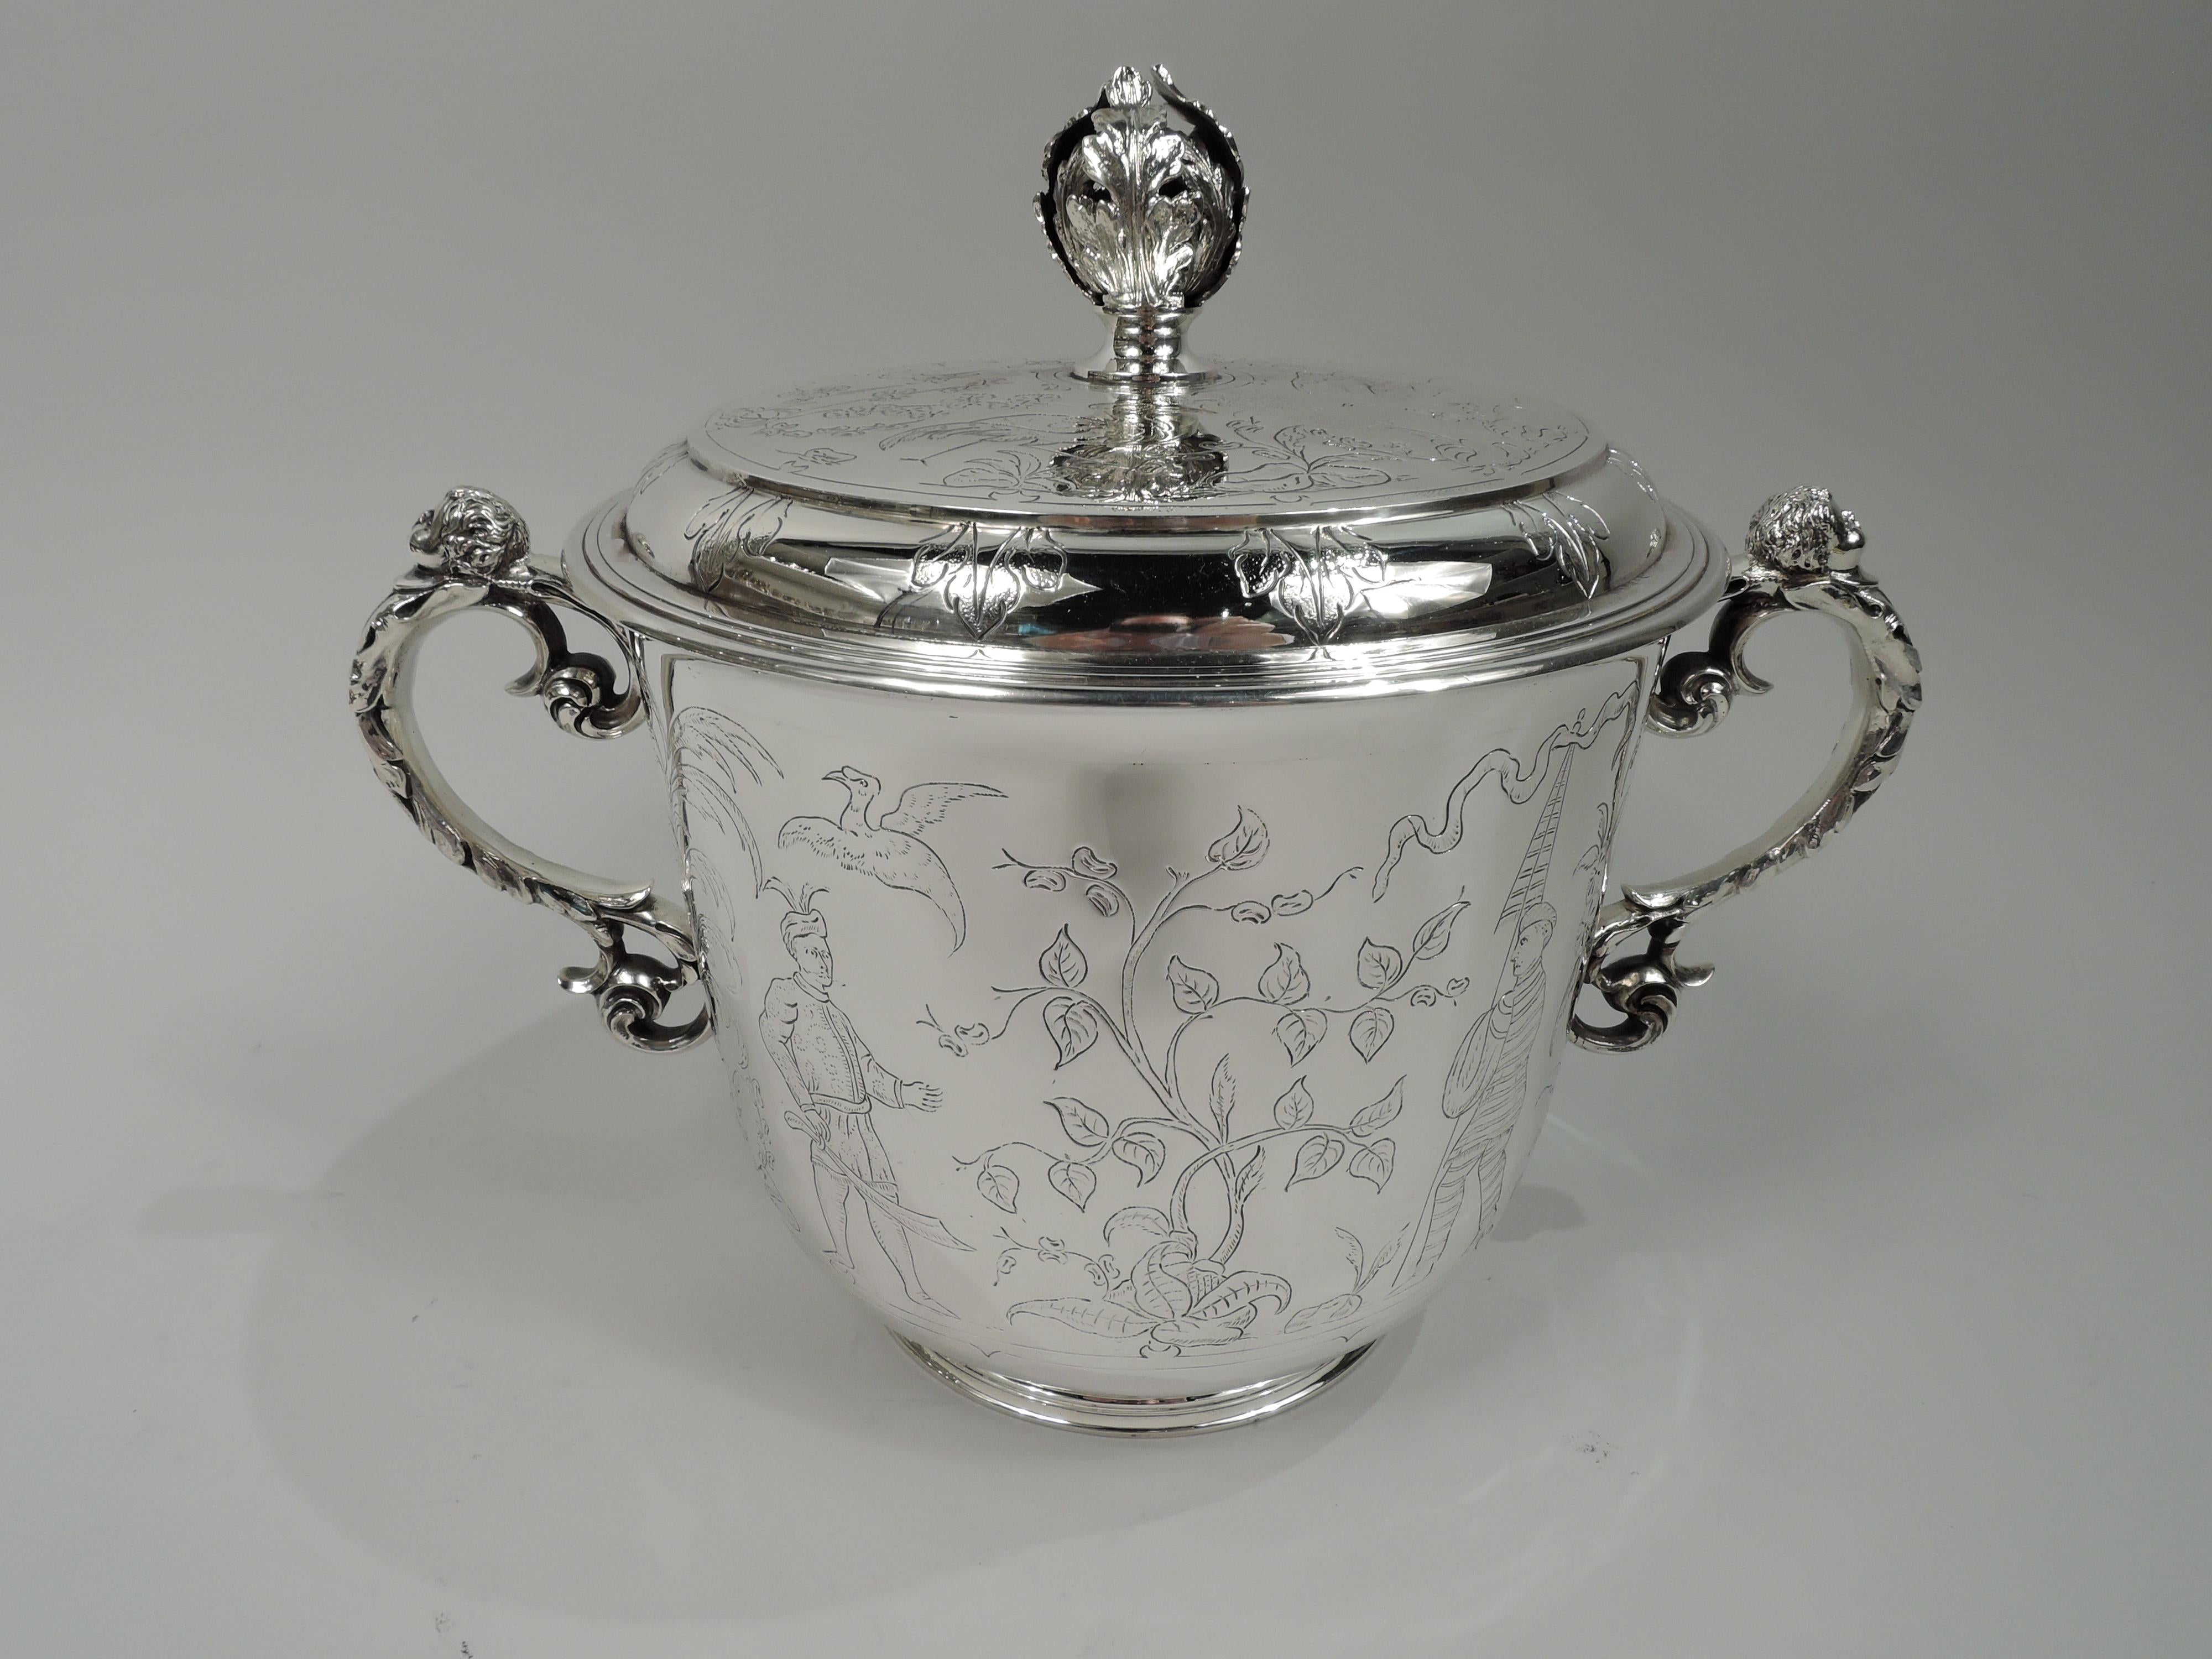 George V sterling silver ice bucket. Made by Charles & Richard Comyns in London in 1925. Urn with curved bottom and raised and inset foot. Leaf-wrapped s-scroll side handles with cherub cap in form of chubby-cheeked, curly haired boy. Cover raised